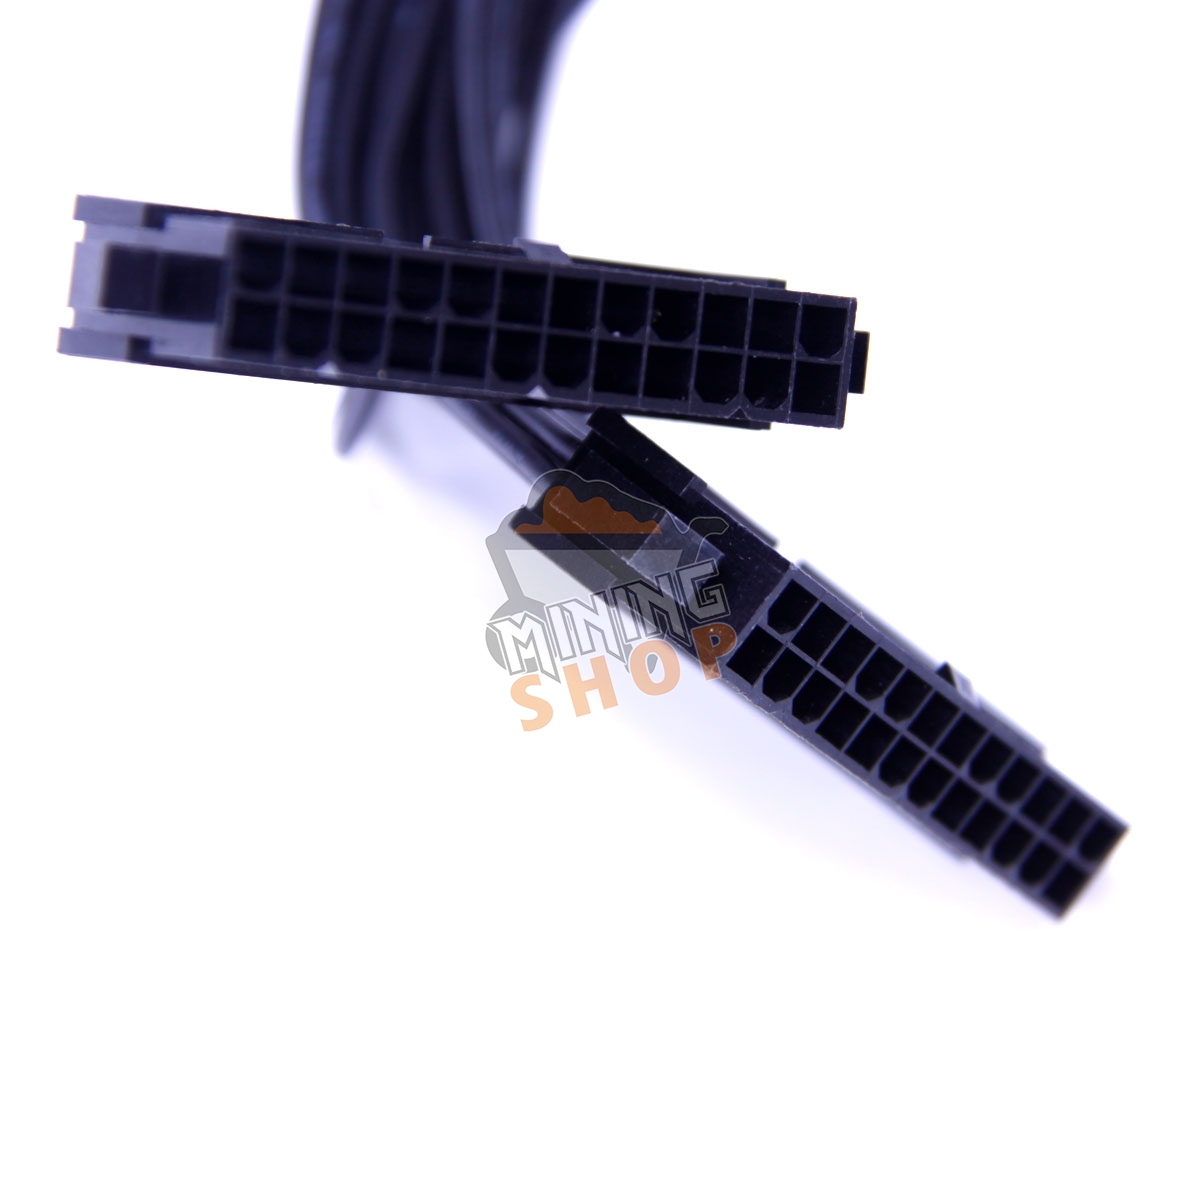 24 Pin Dual PSU Adapter HuDieM Multiple Power Supply Splitter Extension Cable for Mining ATX Motherboard 